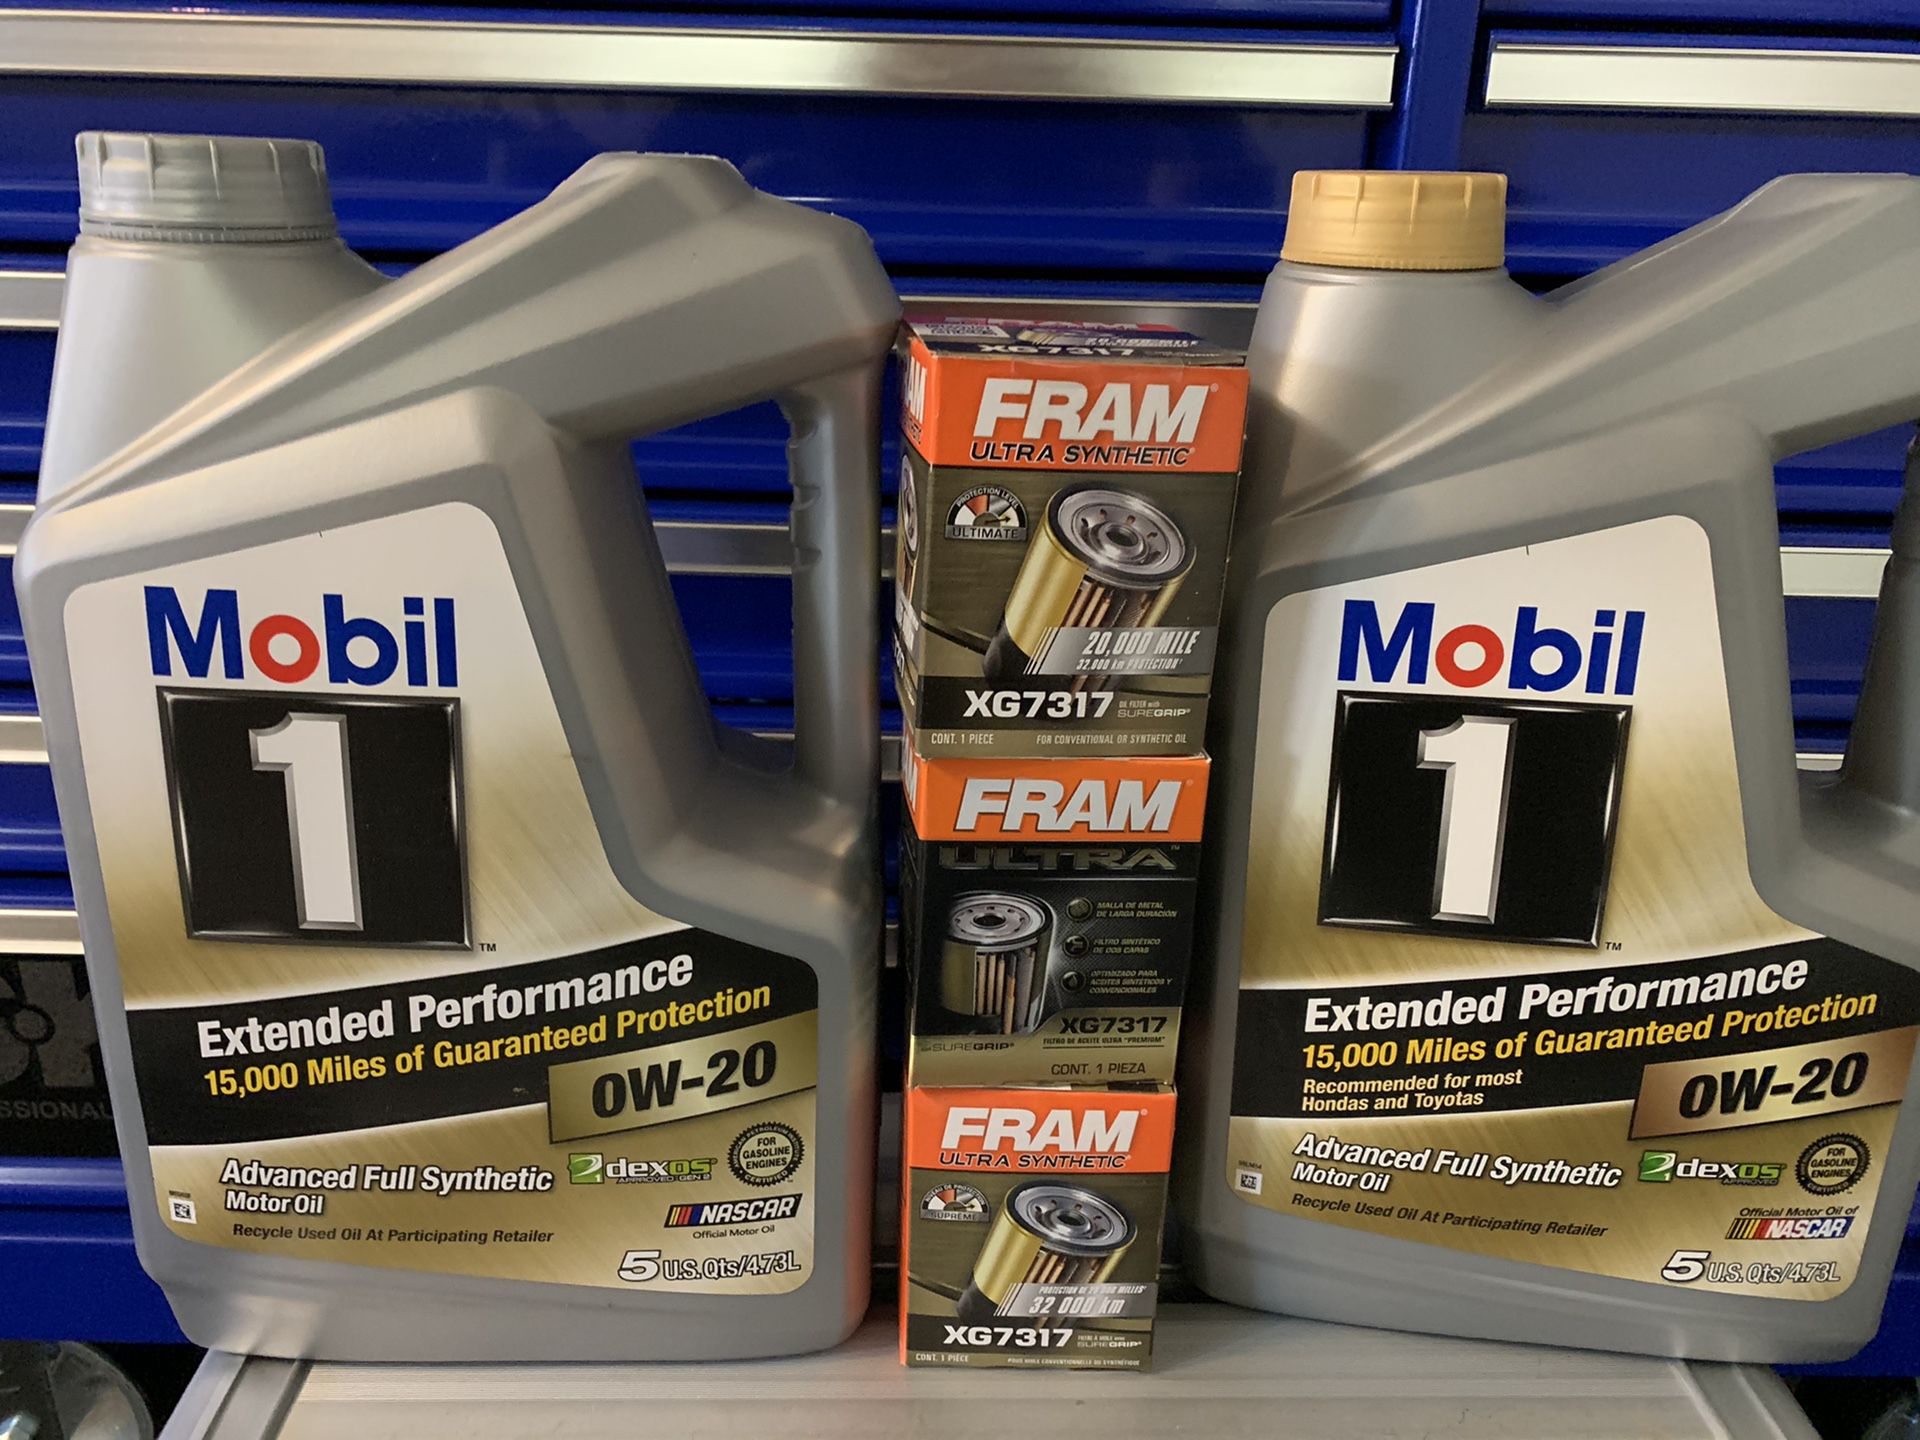 Mobil 1 - OW-20 oil and filters